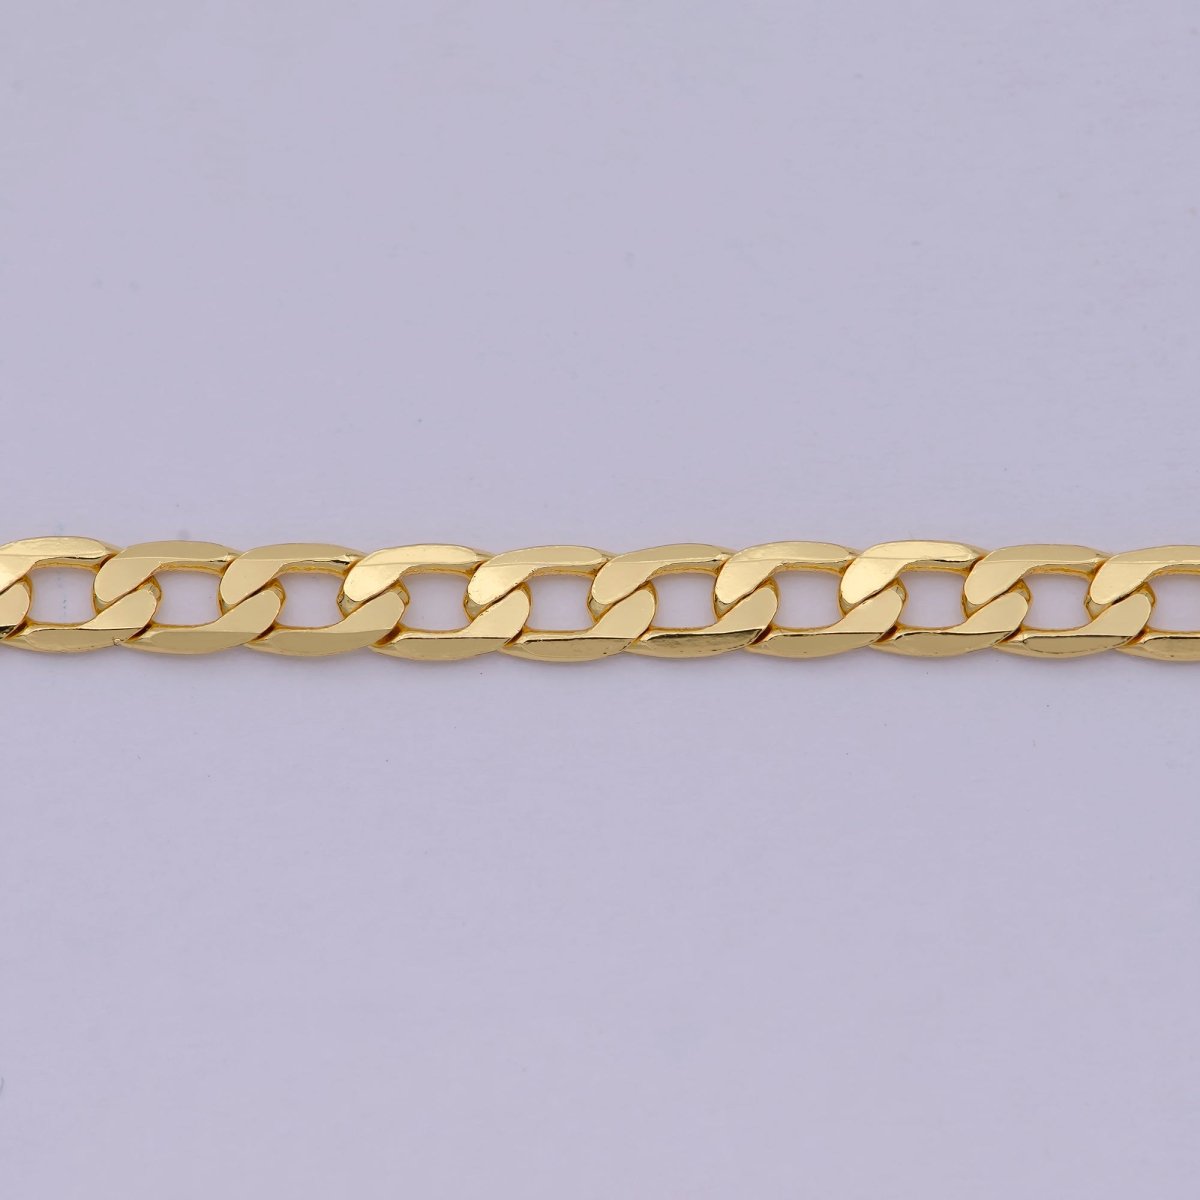 24K Gold Filled Cuban Link Chain Necklace 18 inch Miami Cuban, 3.2mm Gold Chain, Curb Link, Men Women Chain Necklaces | WA-523 Clearance Pricing - DLUXCA